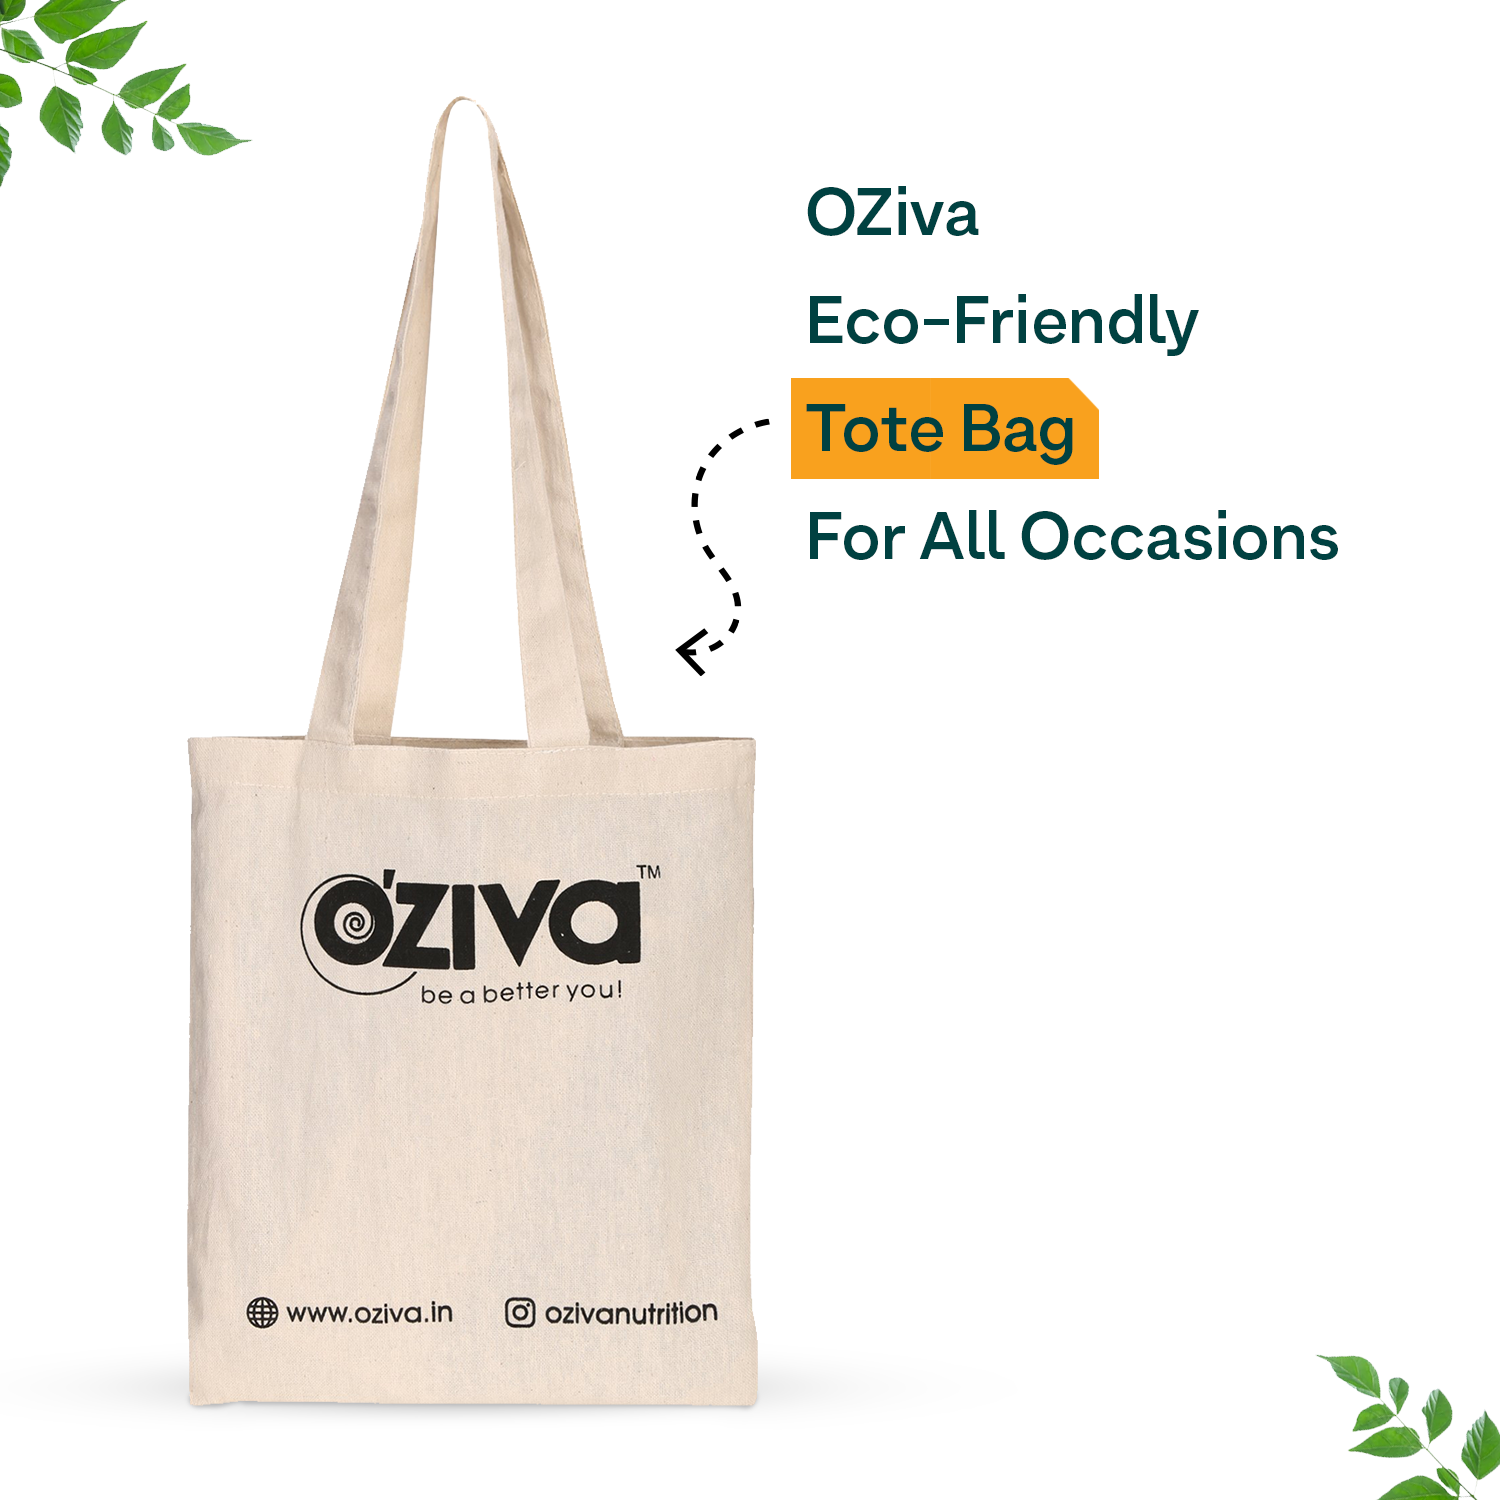 NYRABESPOKE Stylish Eco-Friendly Canvas Tote Bags with Zipper Natural and  Organic Cotton Tote Bag Ideal for Everyday Use, Travel, Women's and College